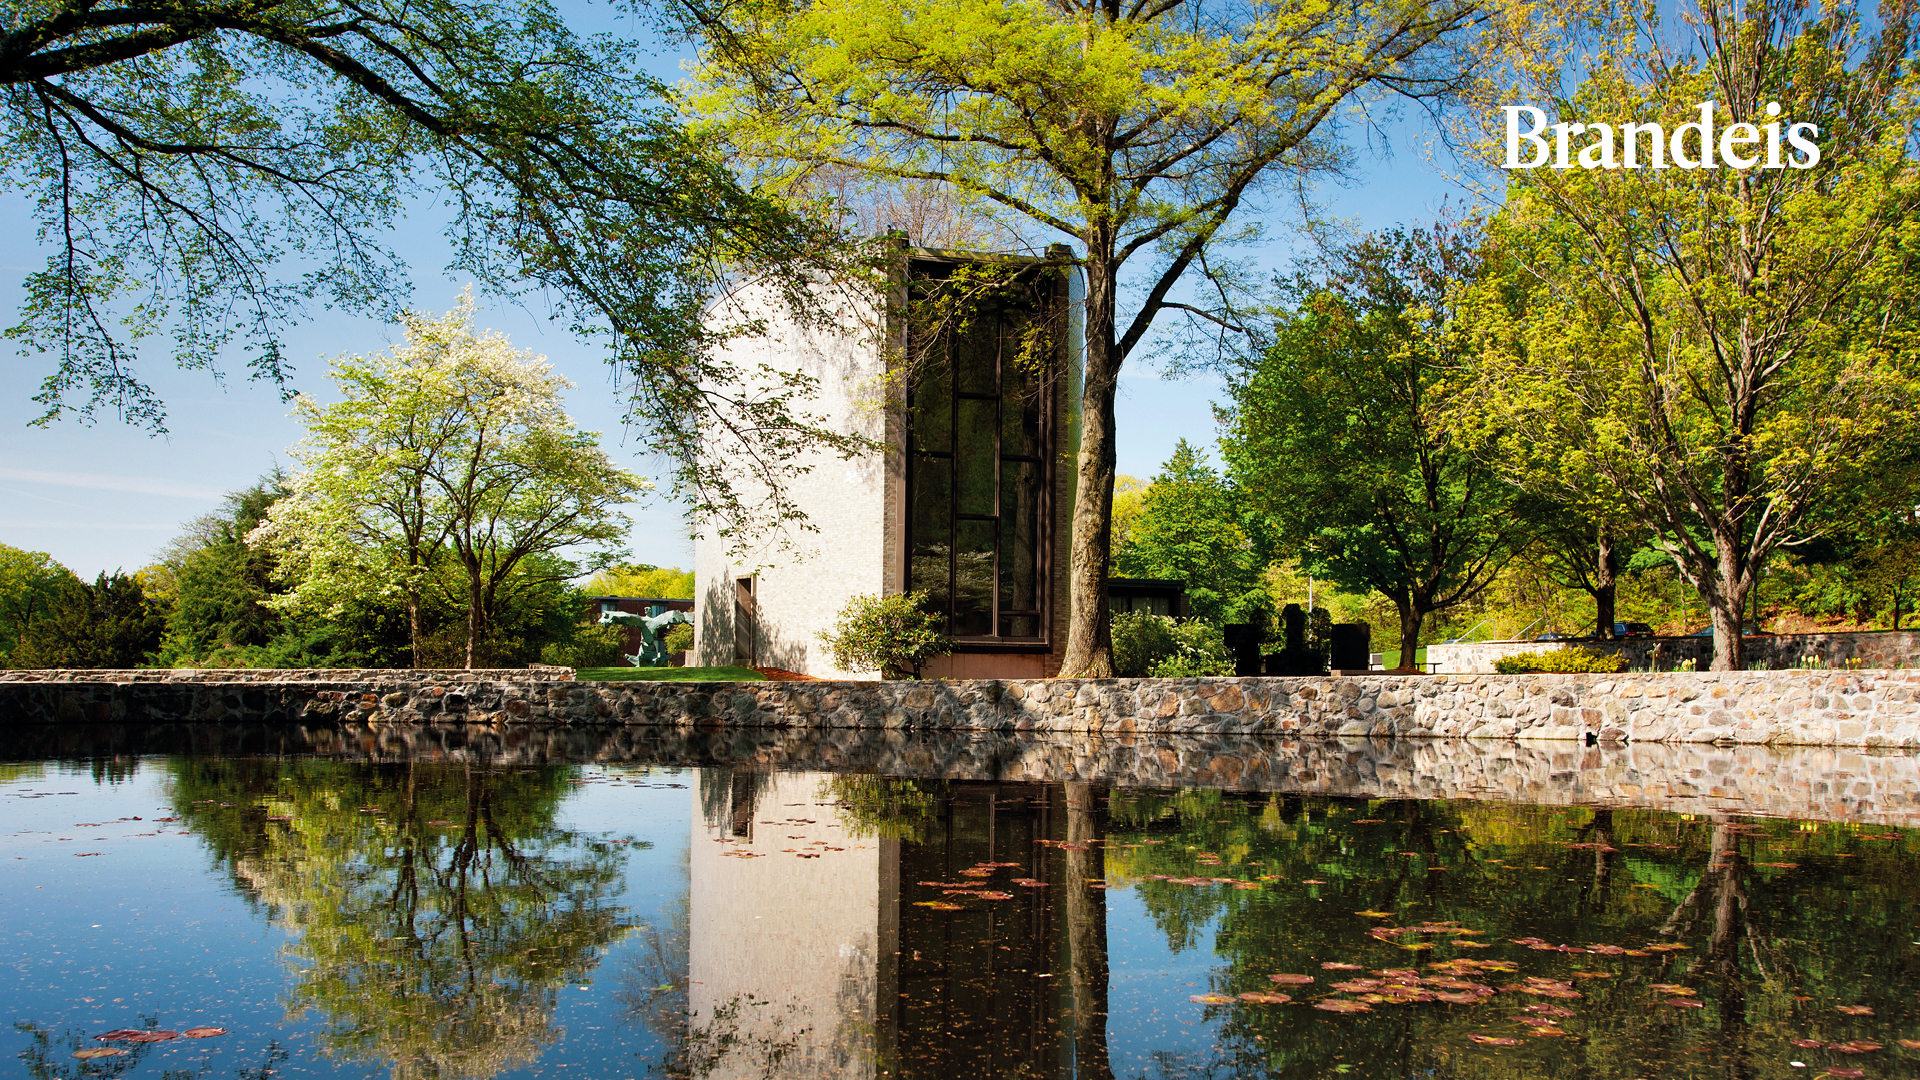 Pond and chapel with Brandeis logo